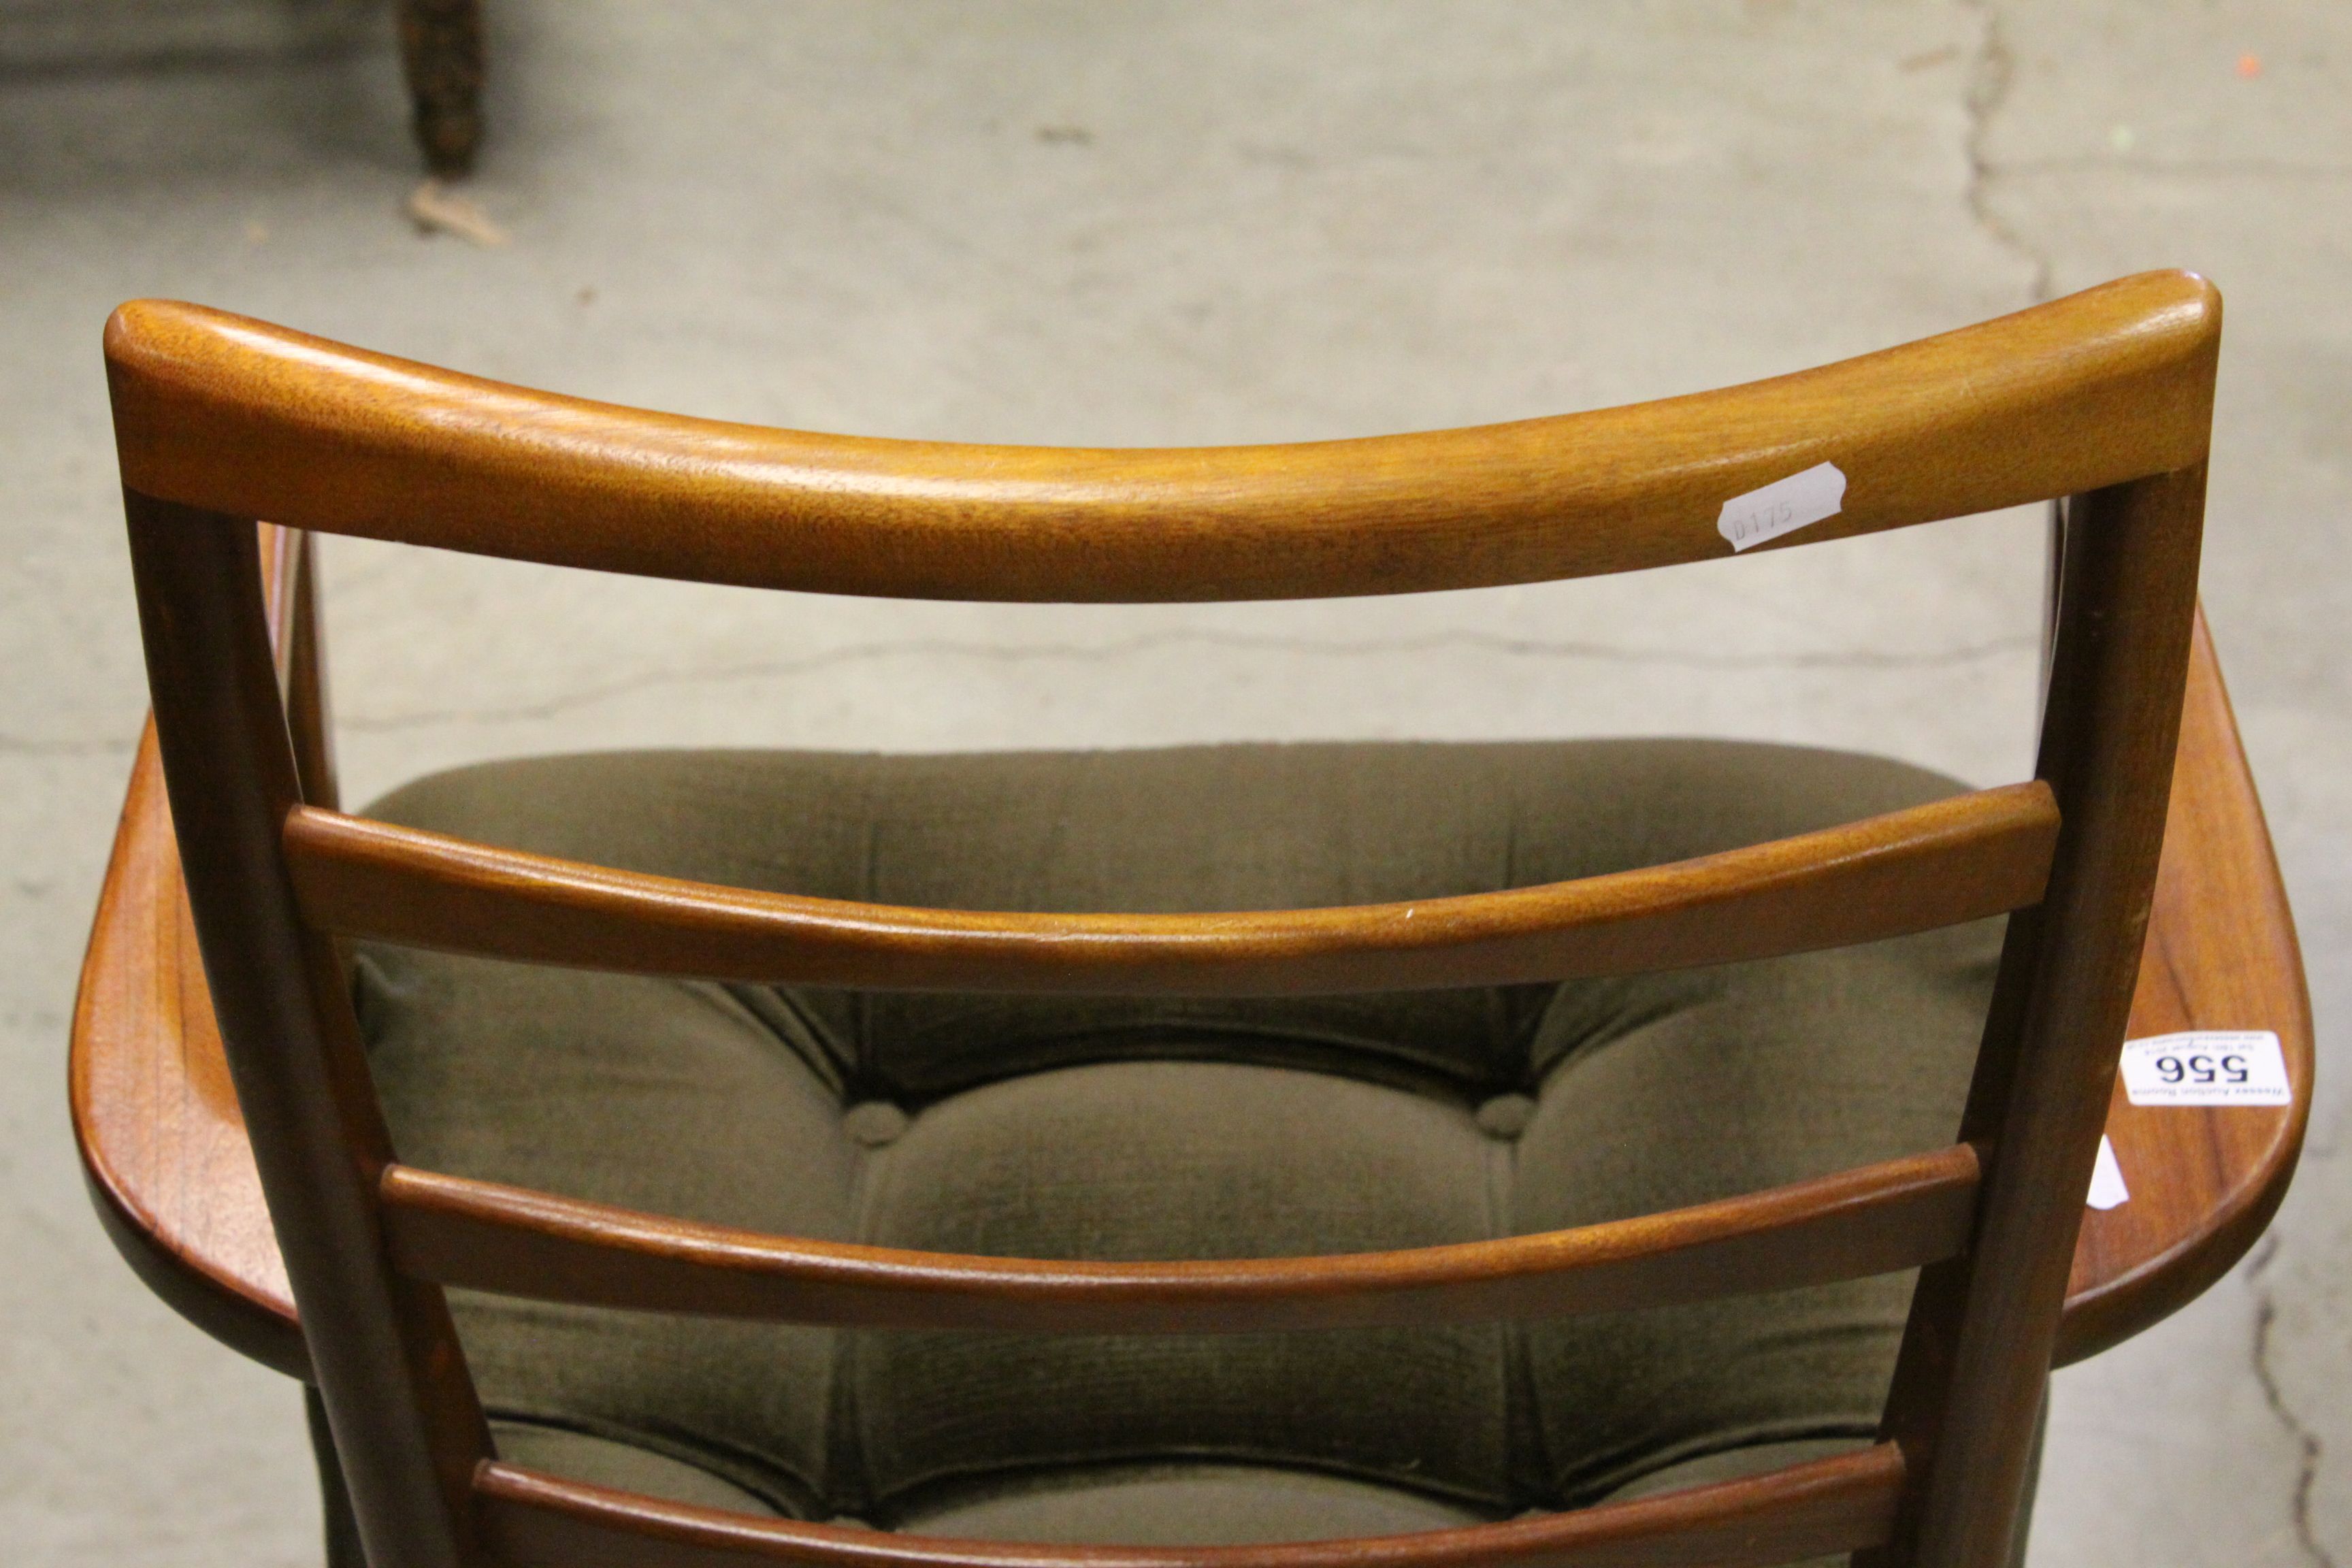 Retro Danish Style Teak Elbow Chair with Padded Seat - Image 4 of 7